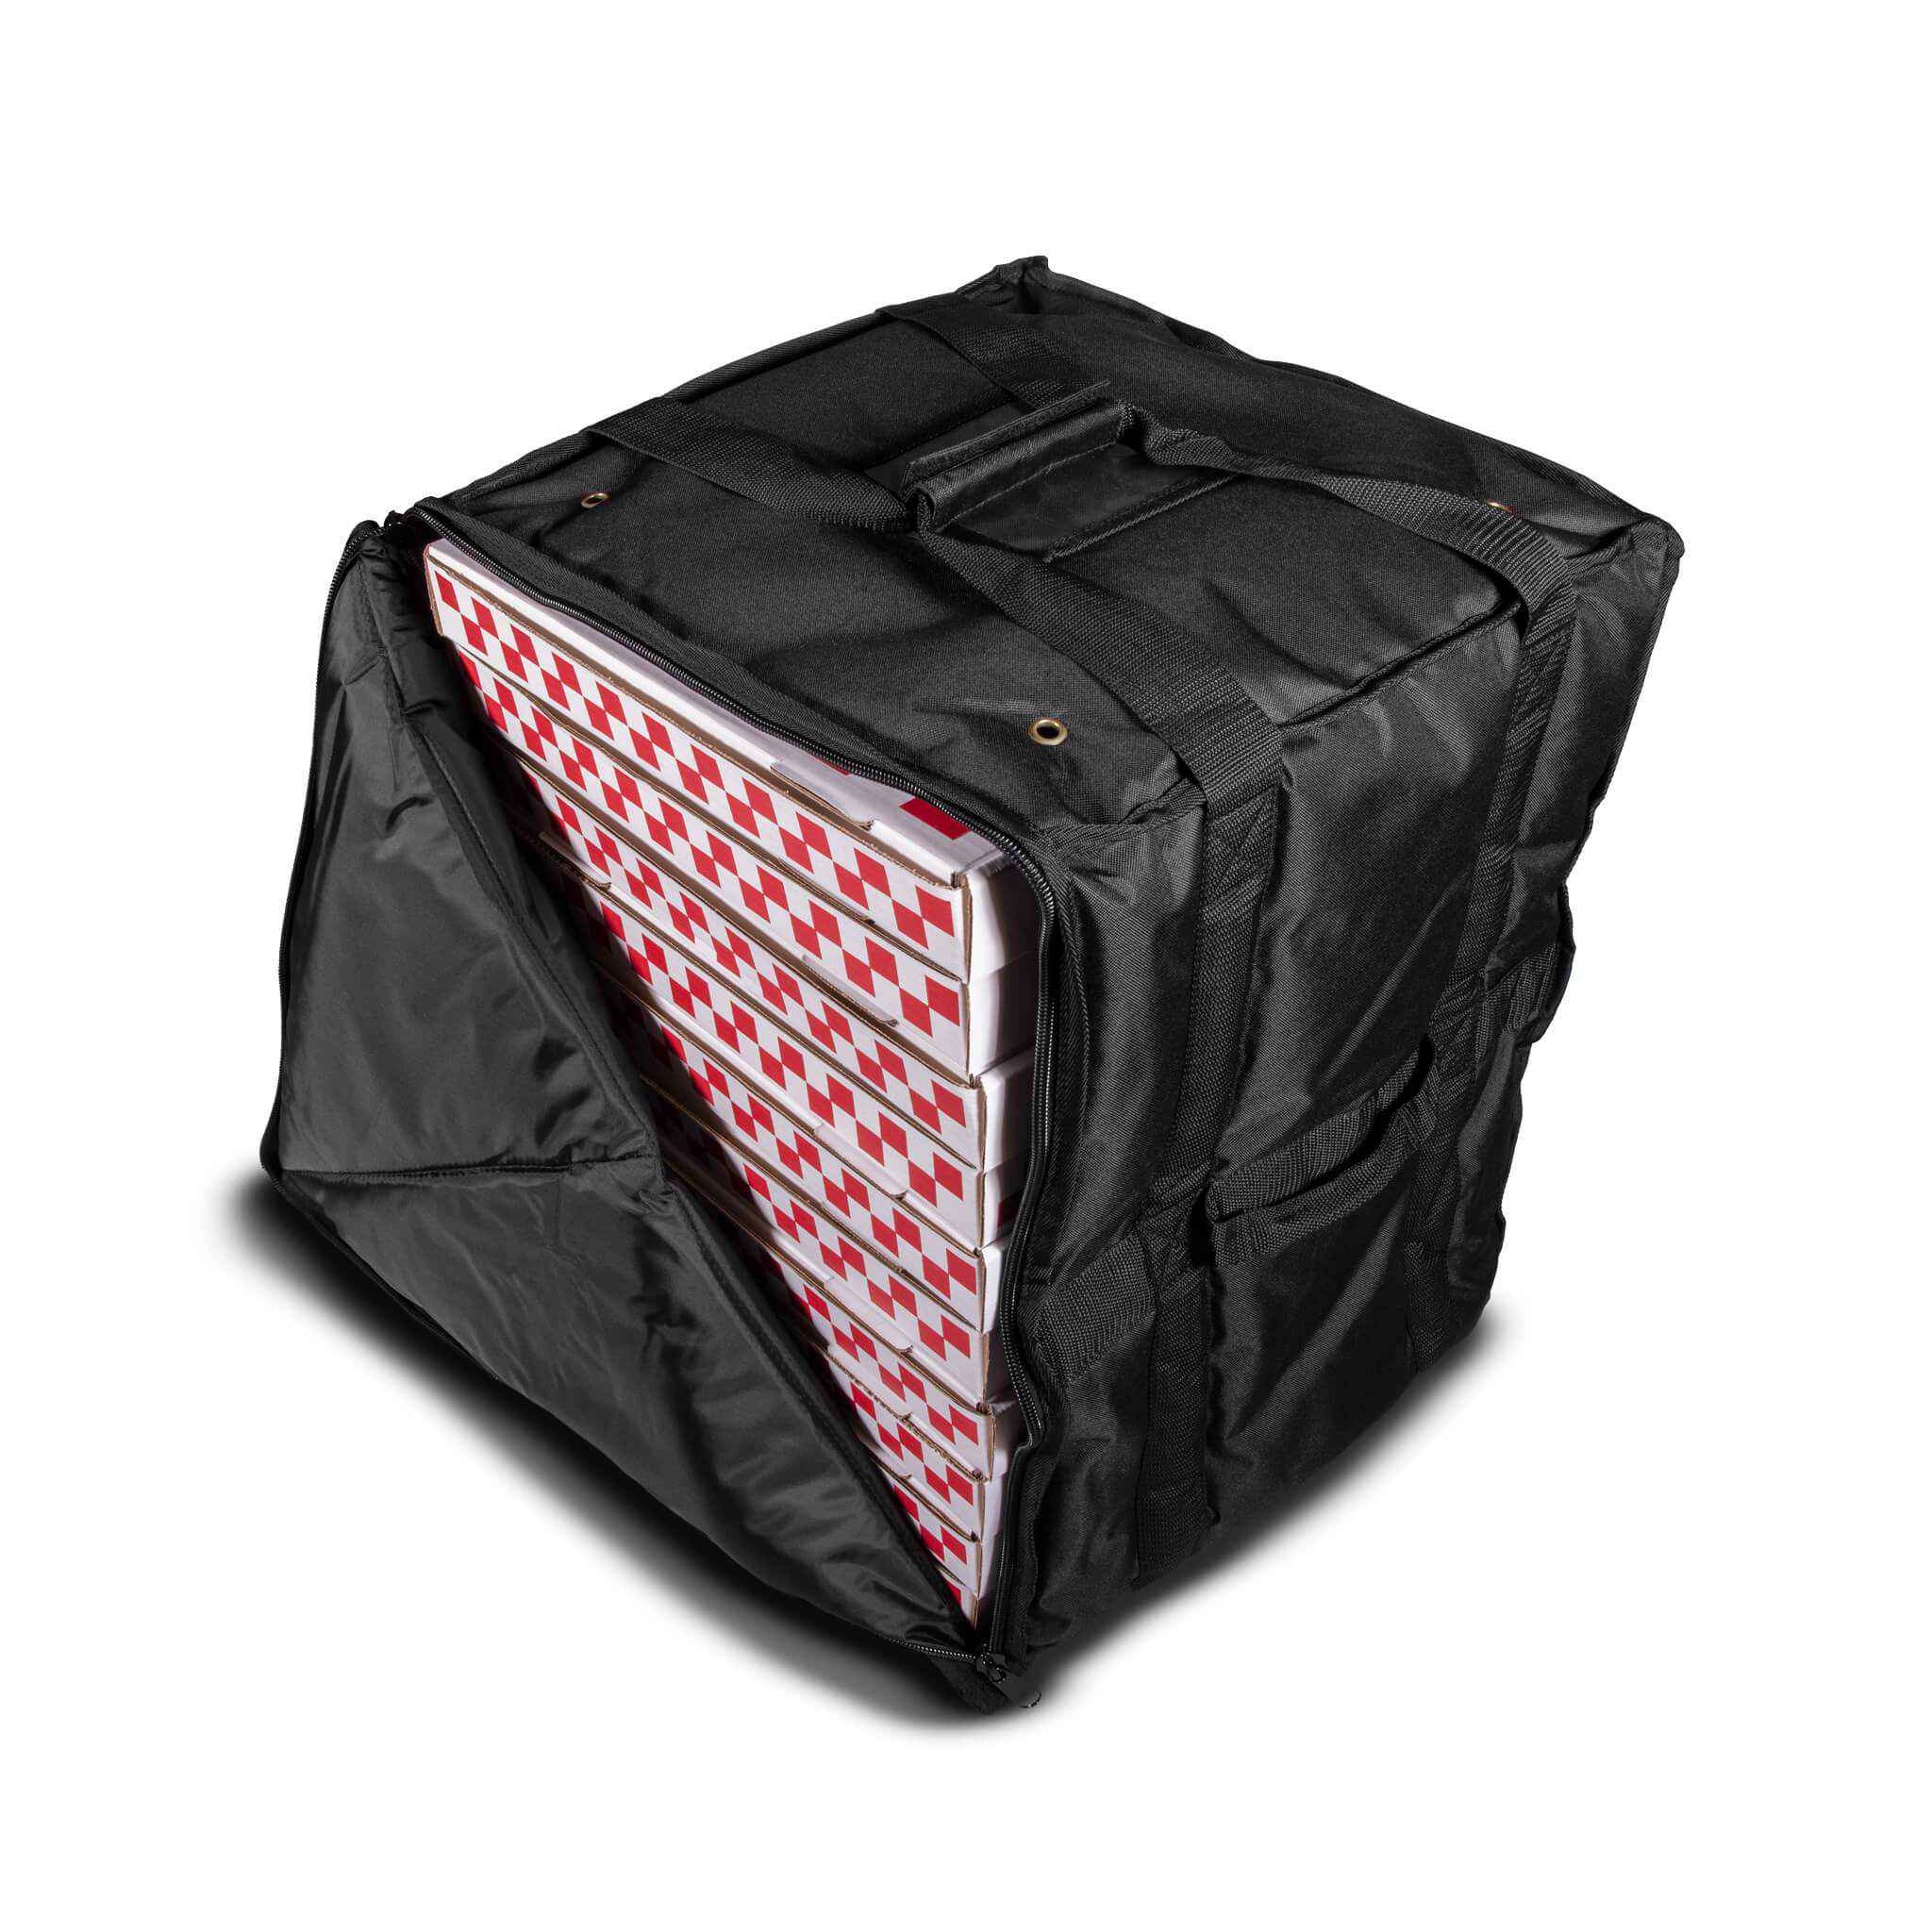 Large Party Size Hard-Sided Pizza Delivery Bag - Incredible Bags